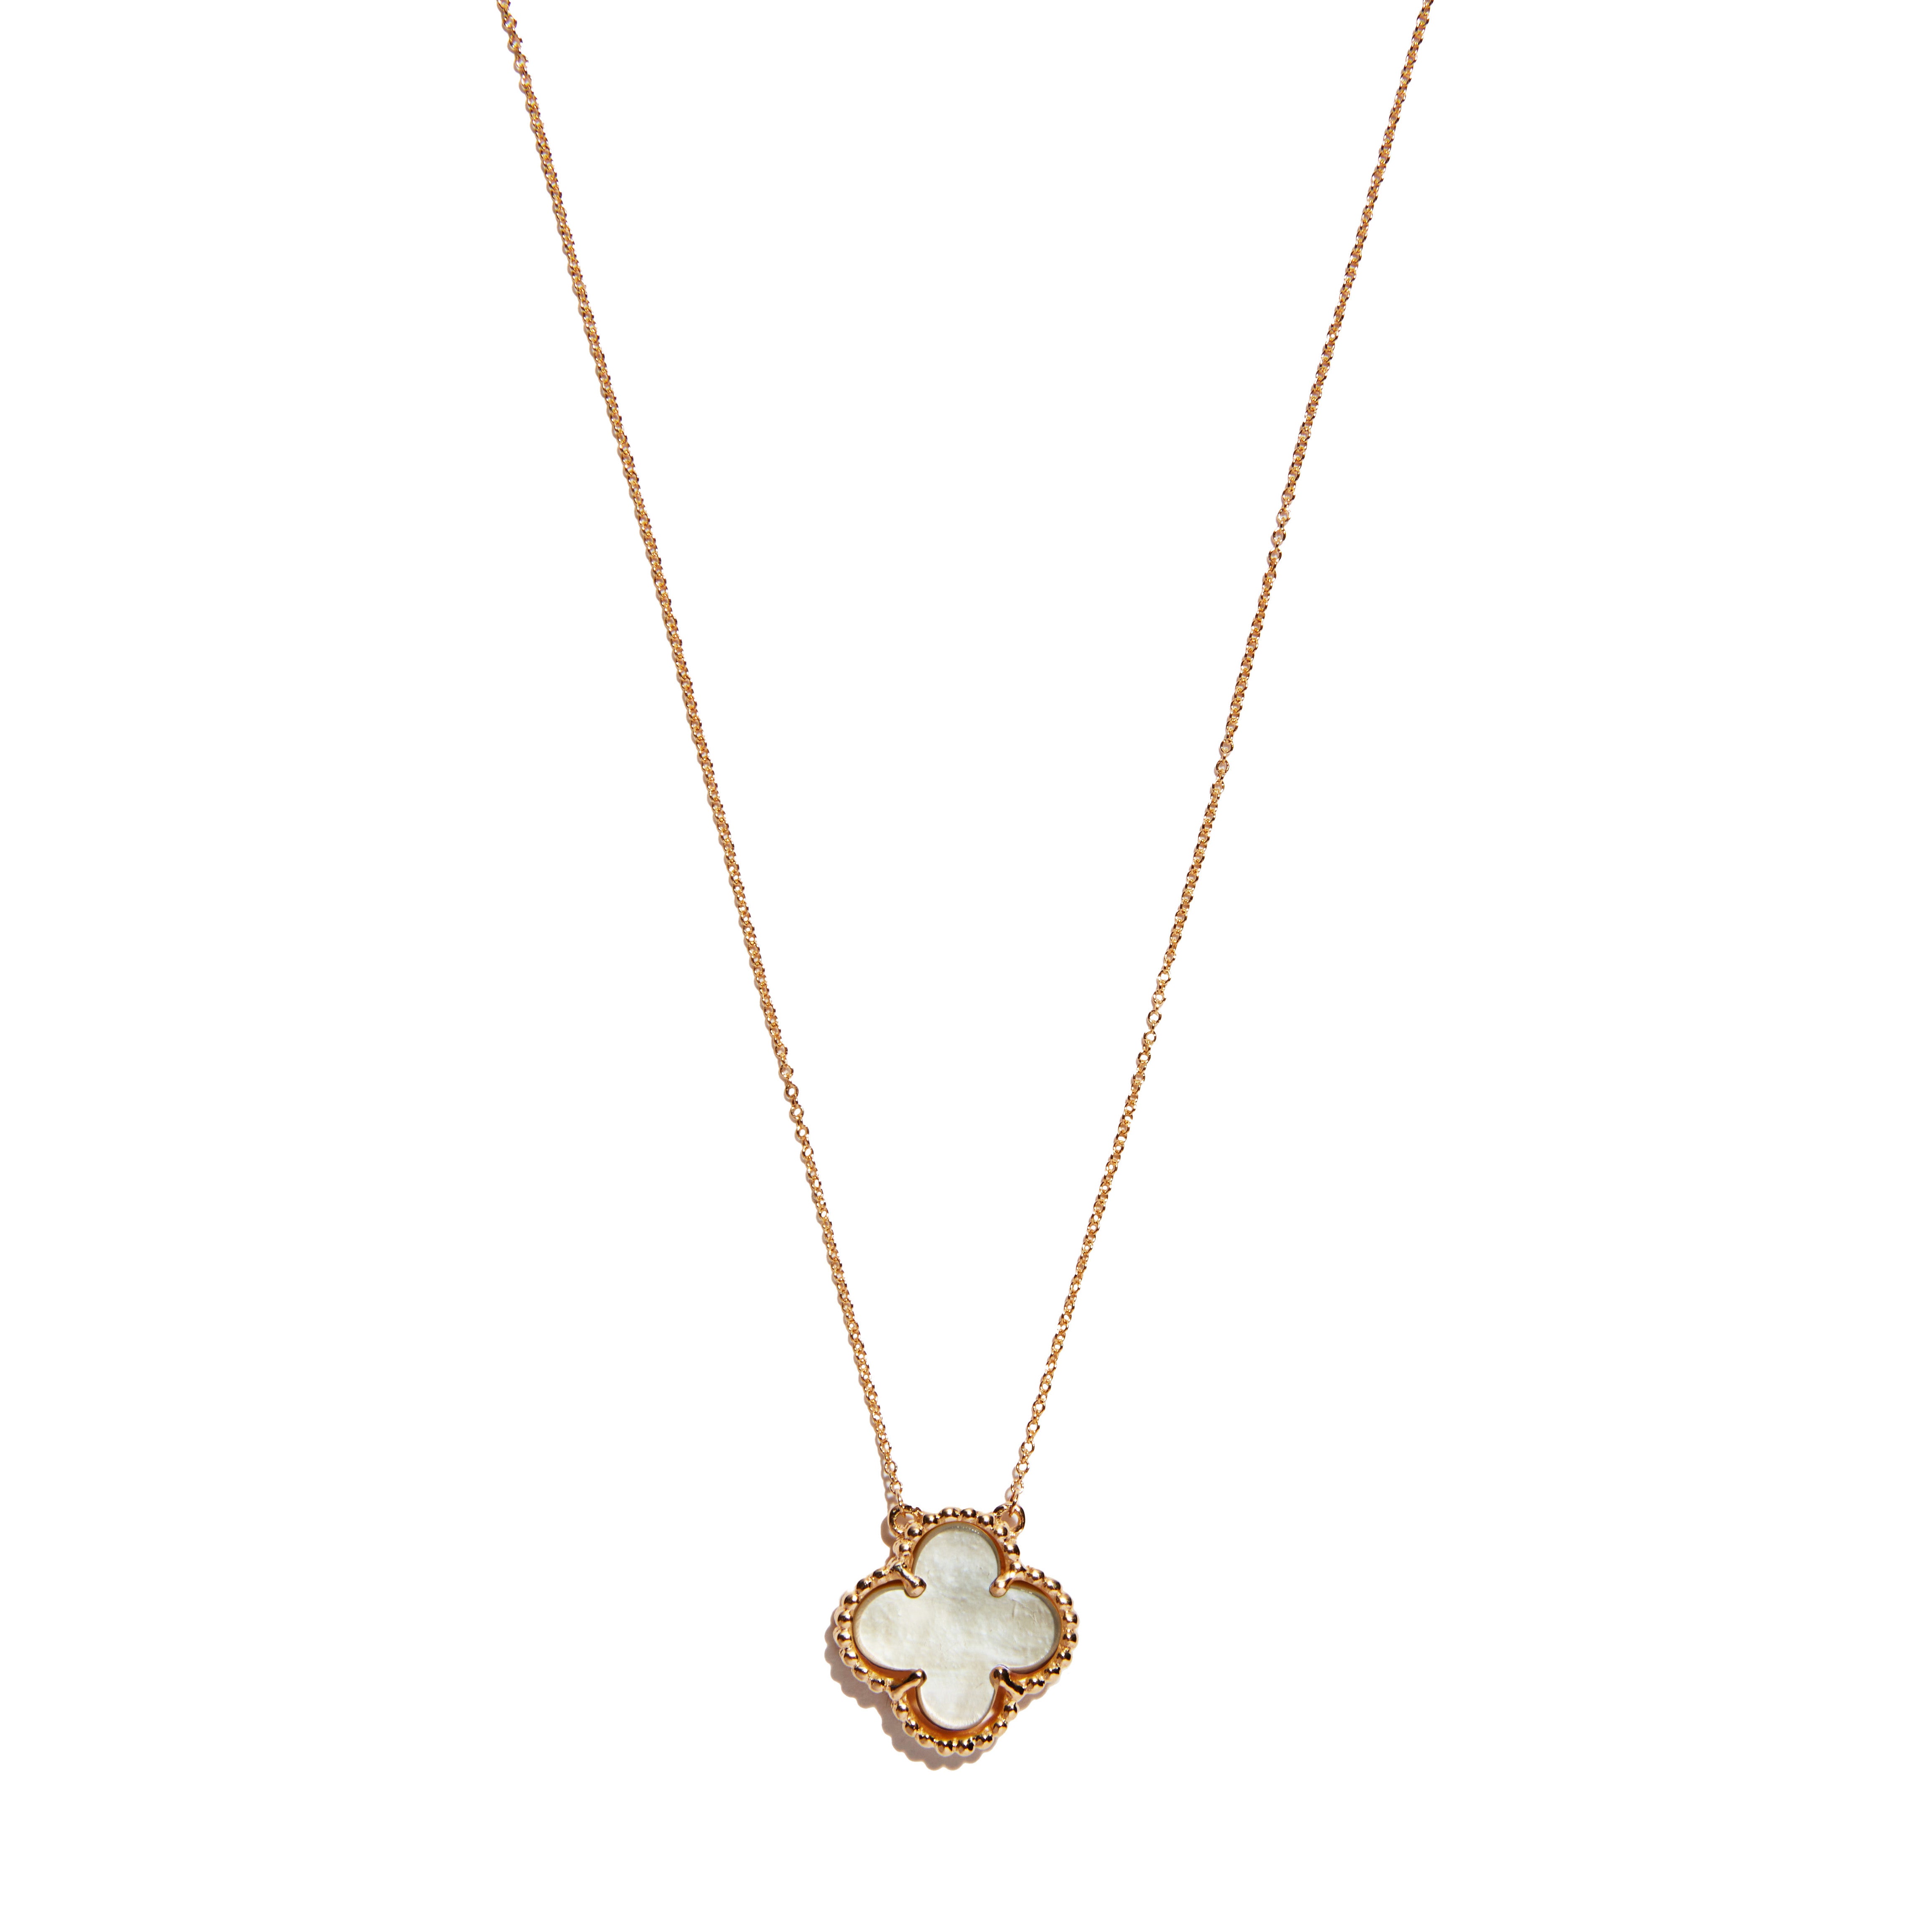 Discover the 9 carat yellow gold mother of pearl clover pendant. This elegant  accessory features a charming clover design crafted from lustrous mother pearl, adding a touch of sophistication and luck to any ensemble. a timeless piece for any jewelry collection.